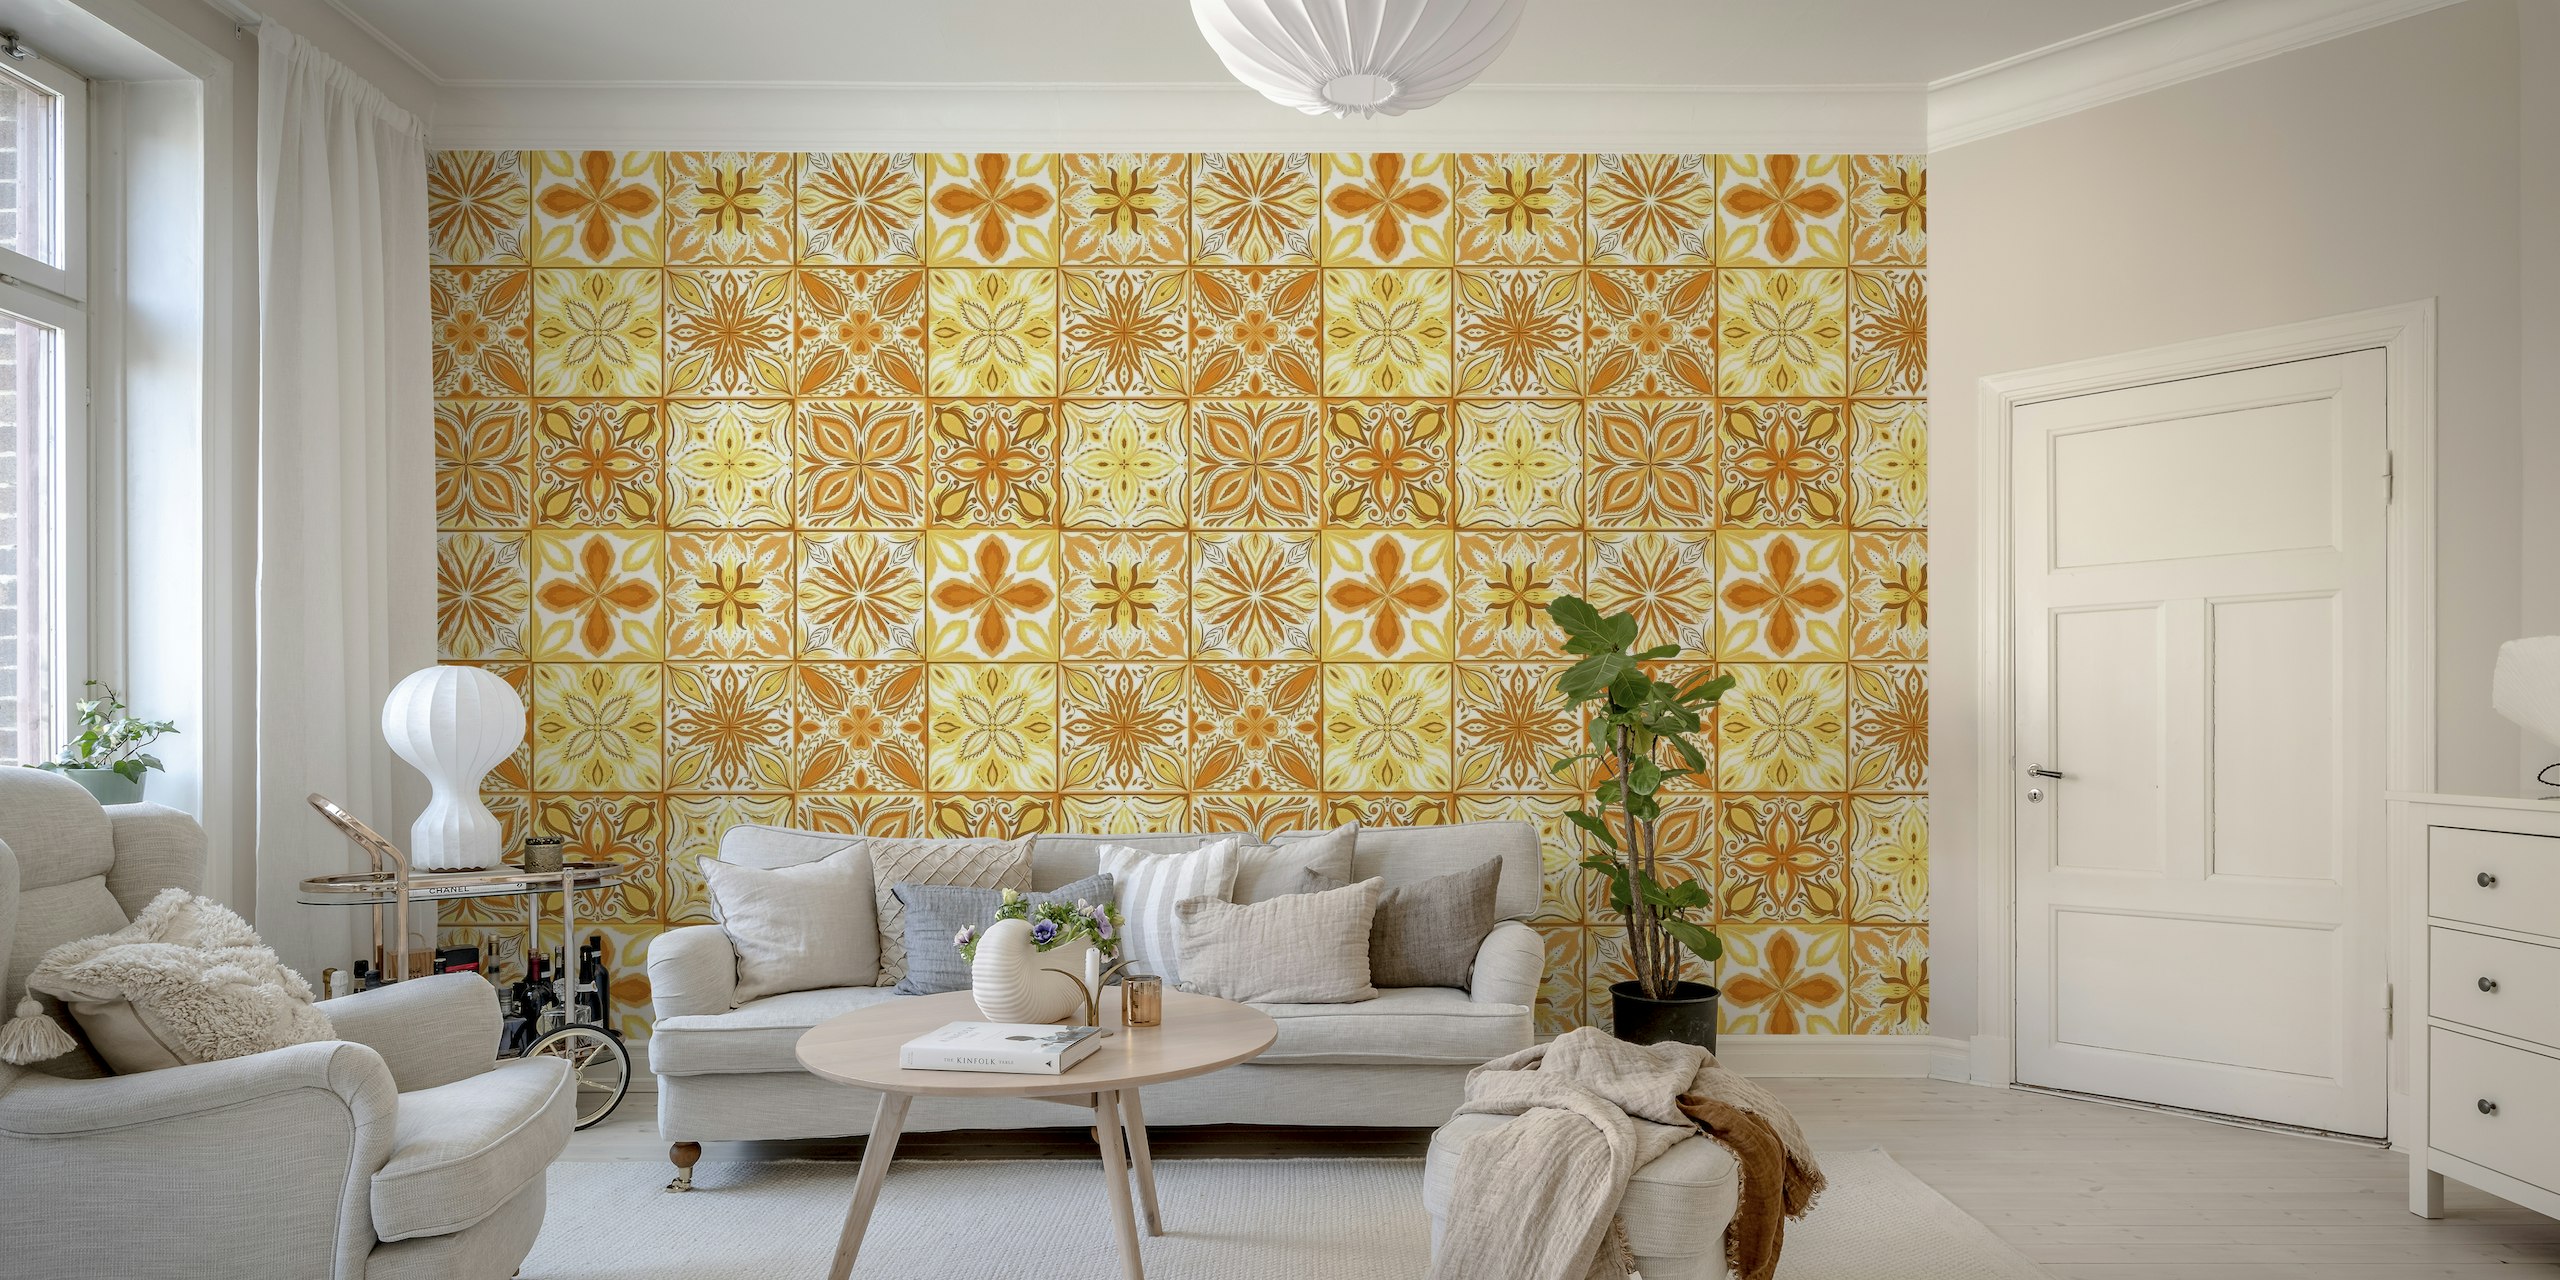 Ornate tiles in orange and yellow papel de parede